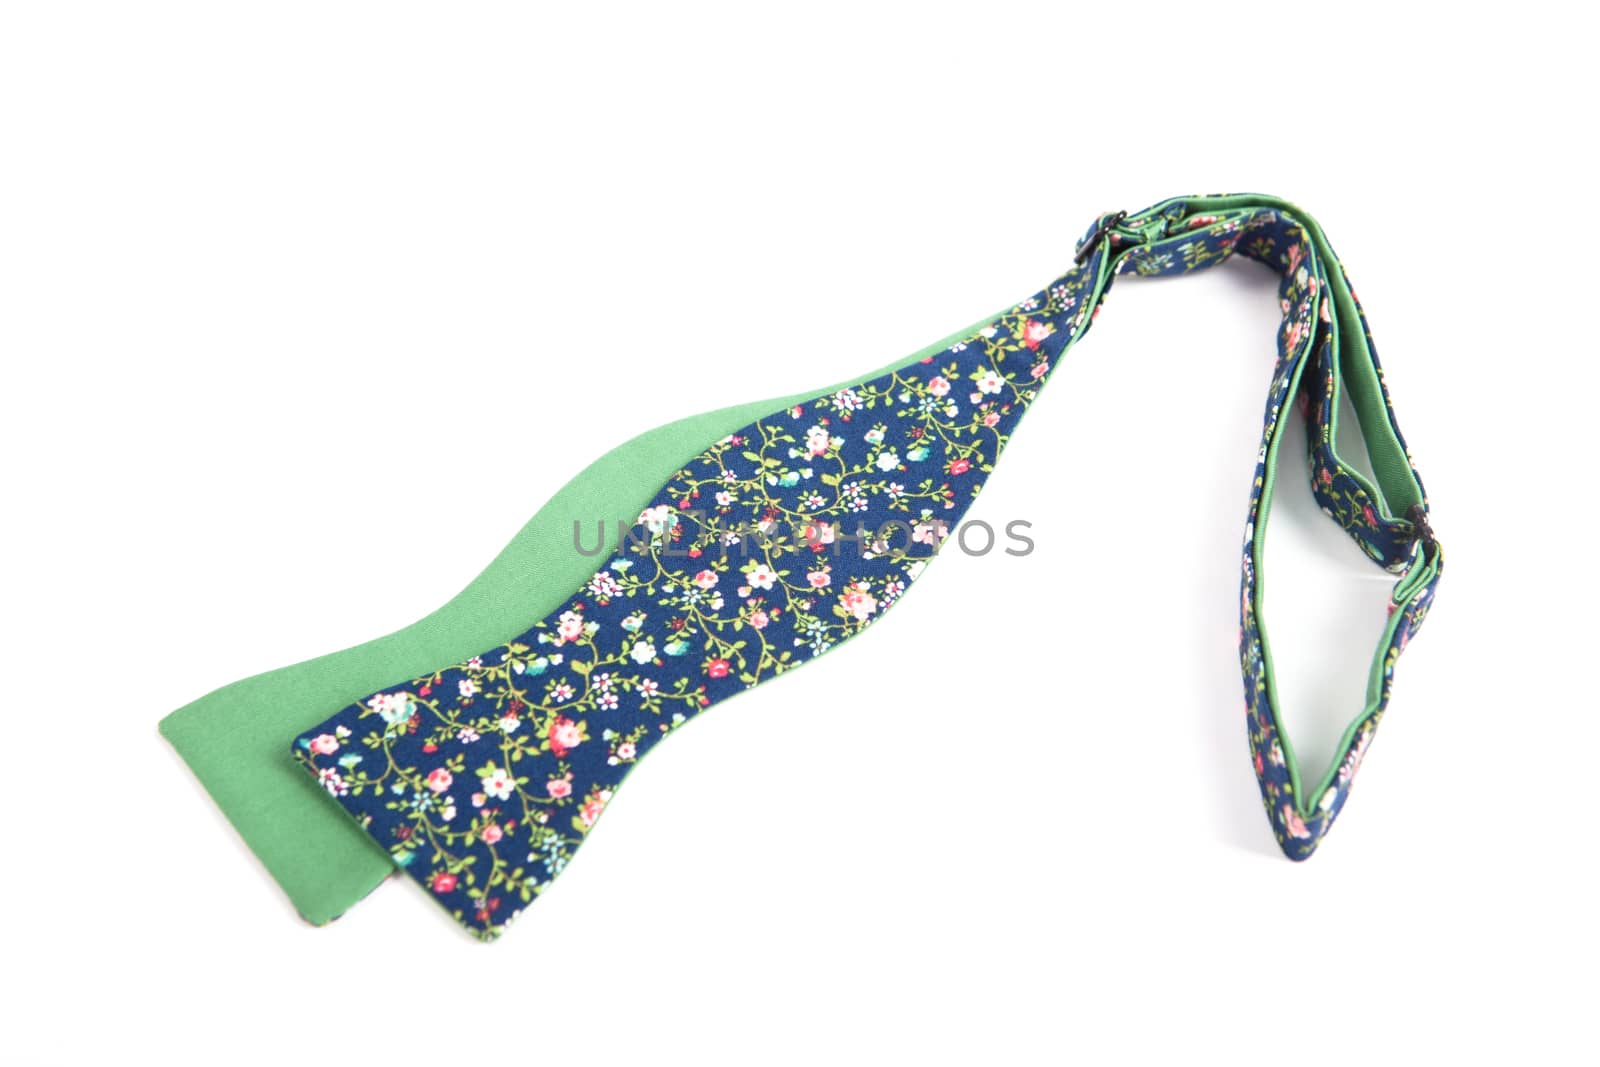 Flower colored bow tie isolated on white background.